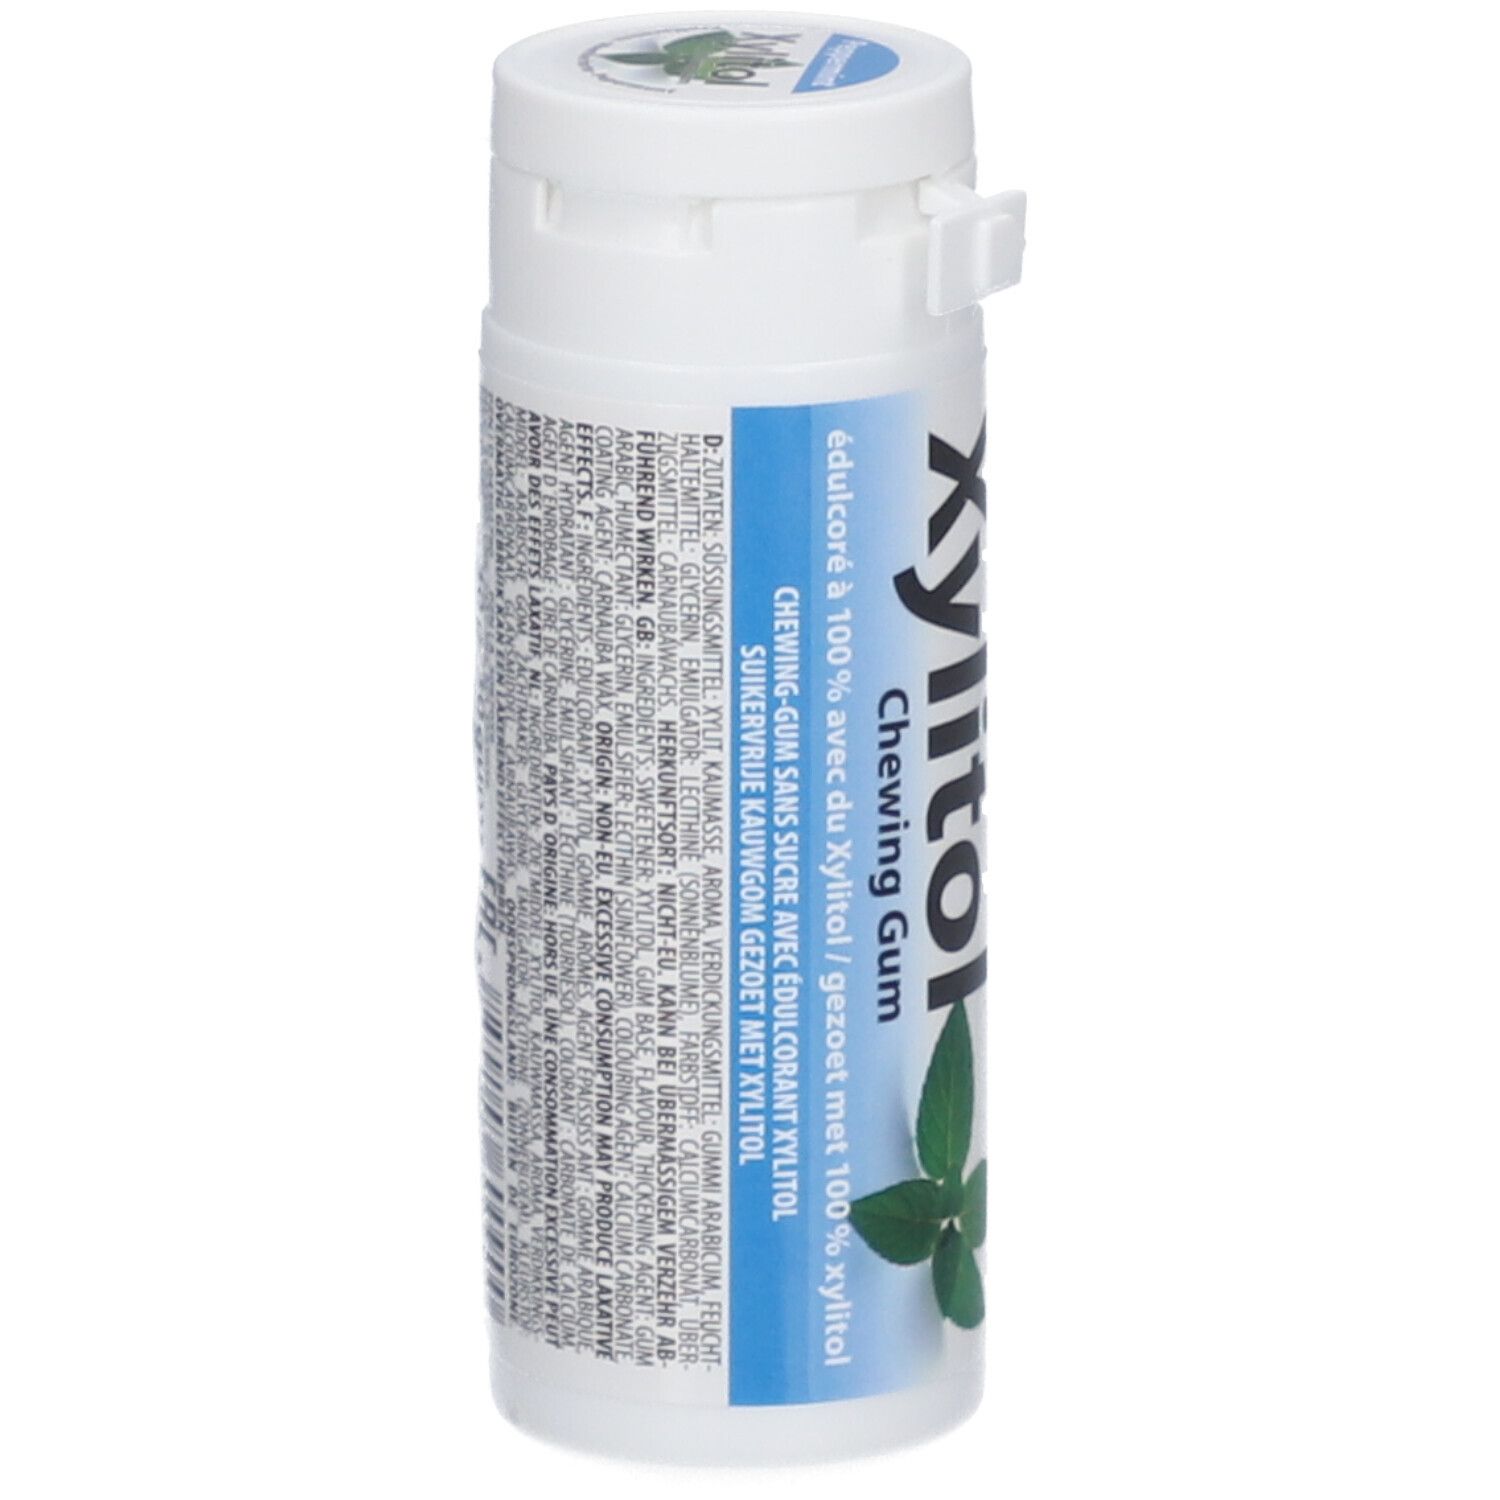 miradent Xylitol Chewing Gum Menthe